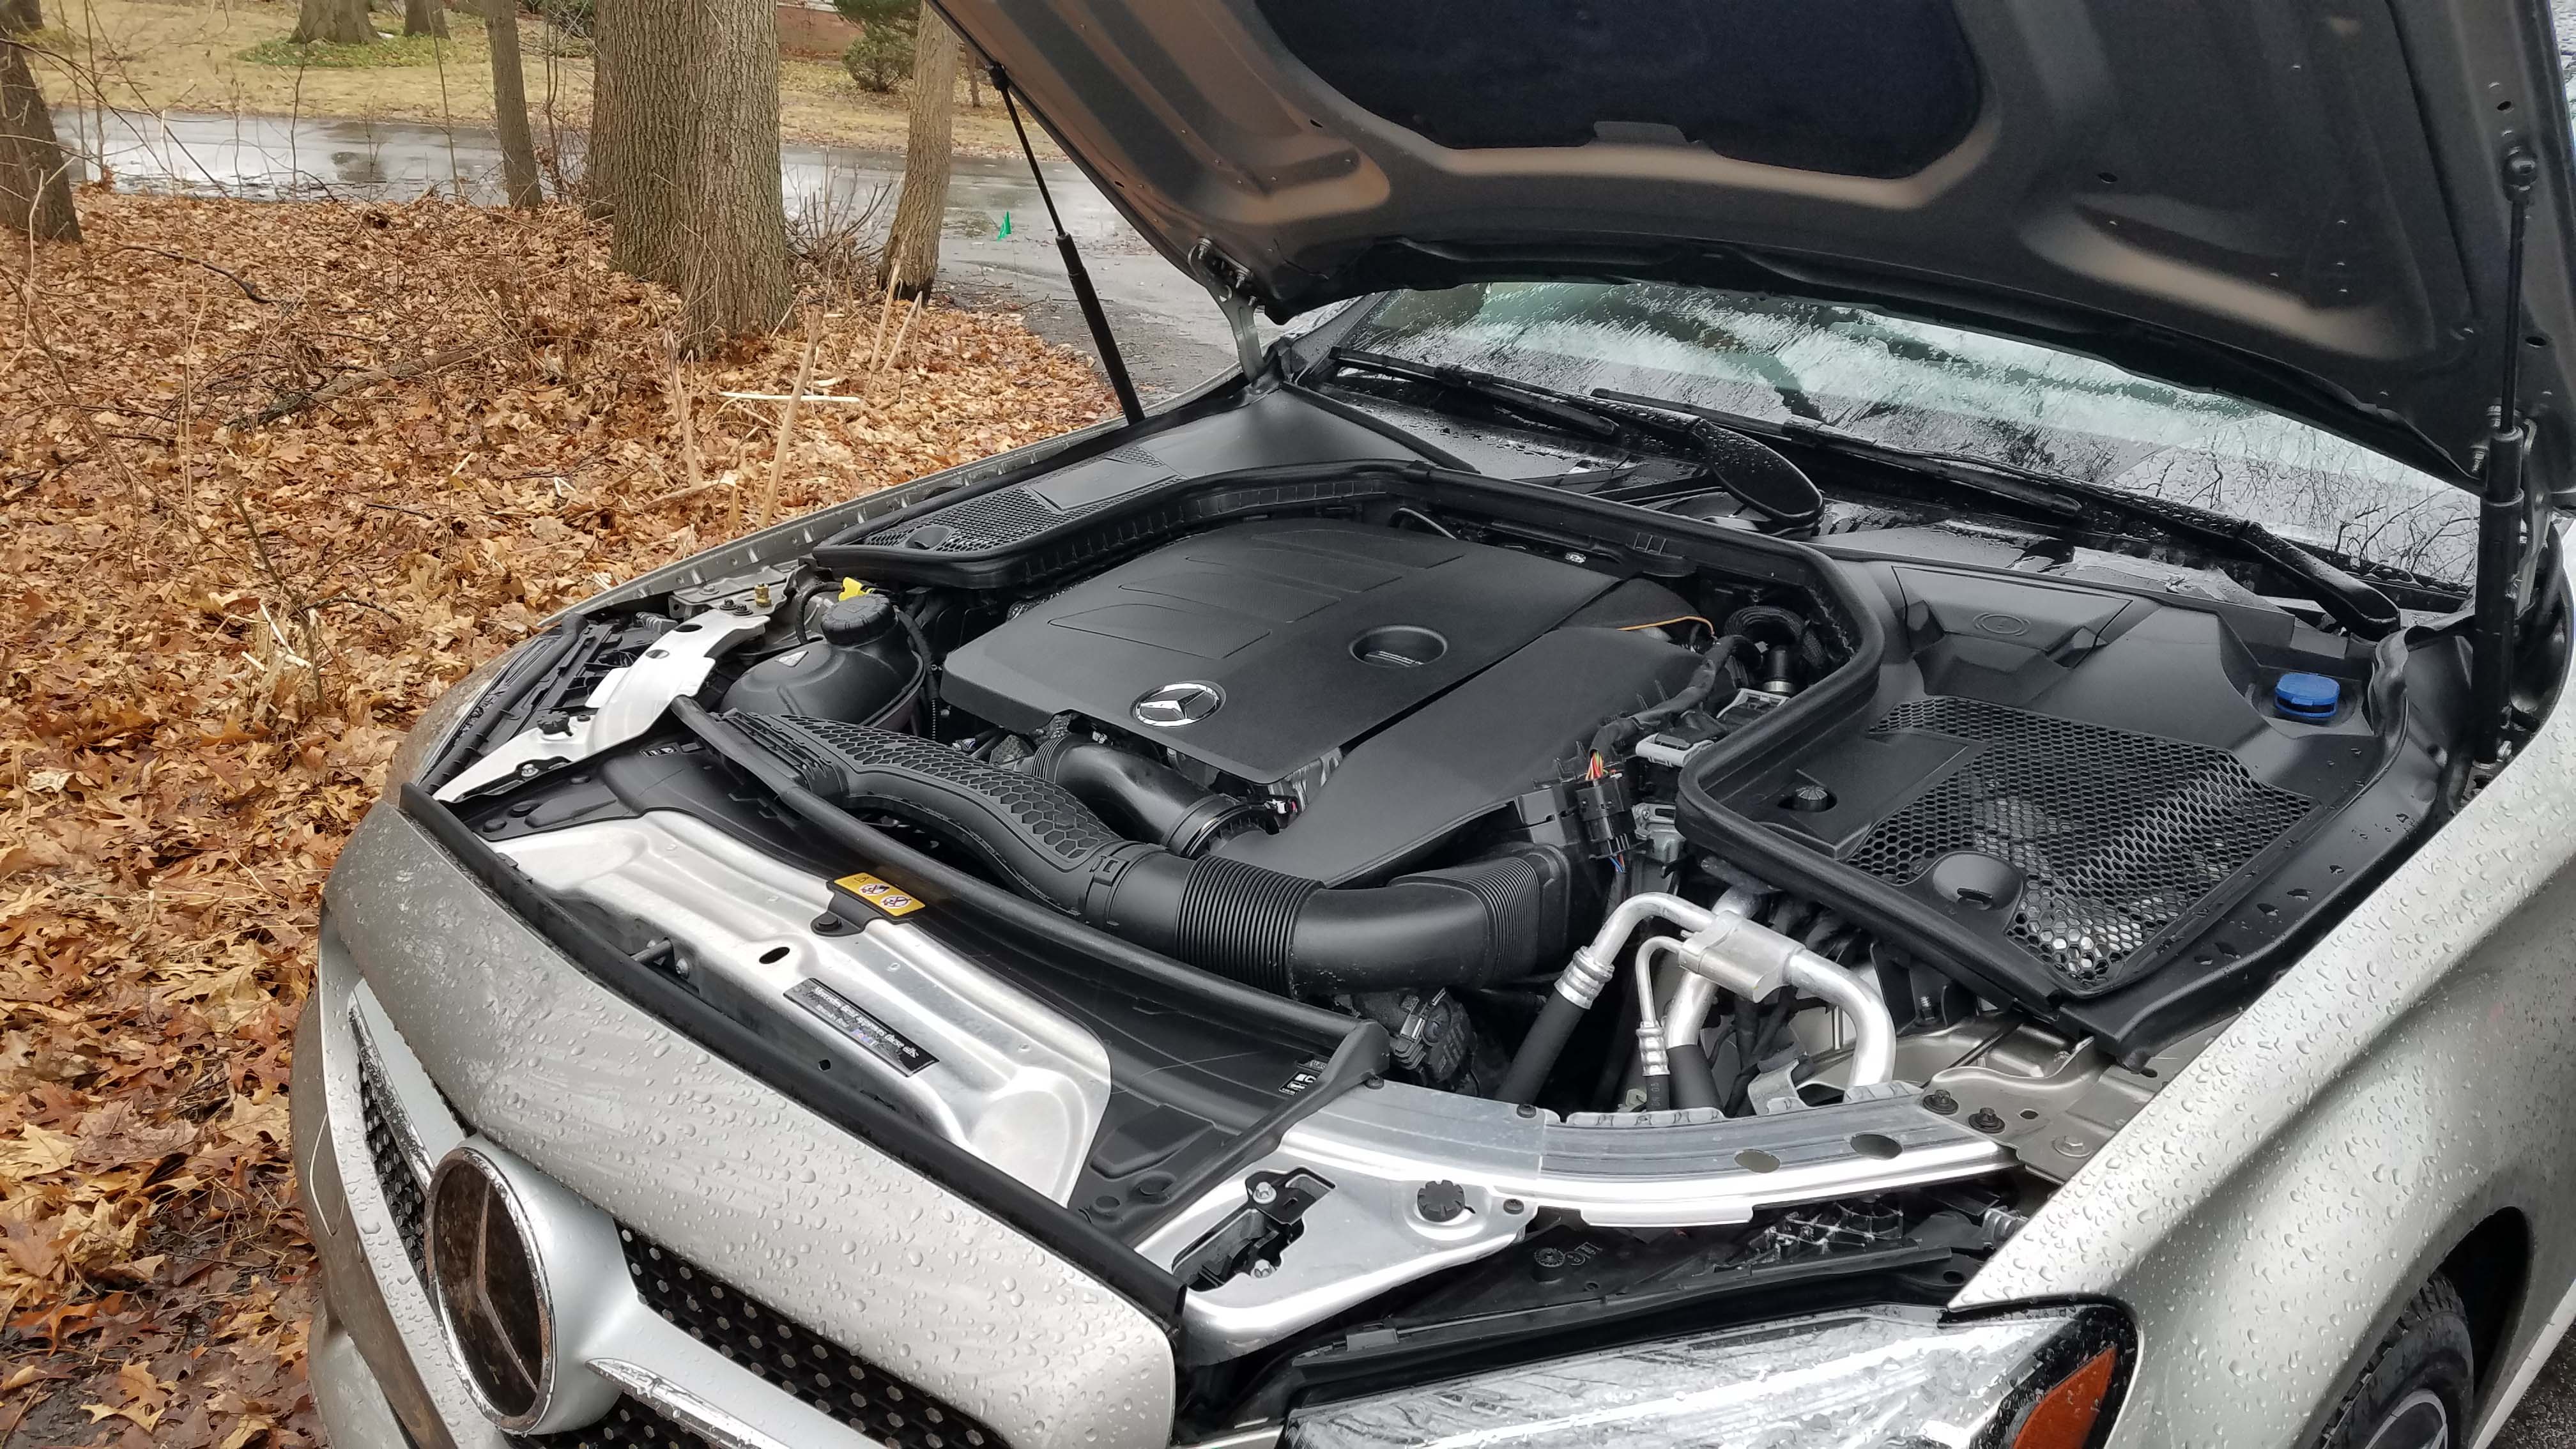 Under the front hood of the 2019 Mercedes C300 is a 2.0-liter, turbo-4 engine connected to a smooth, 9-speed auto tranny.